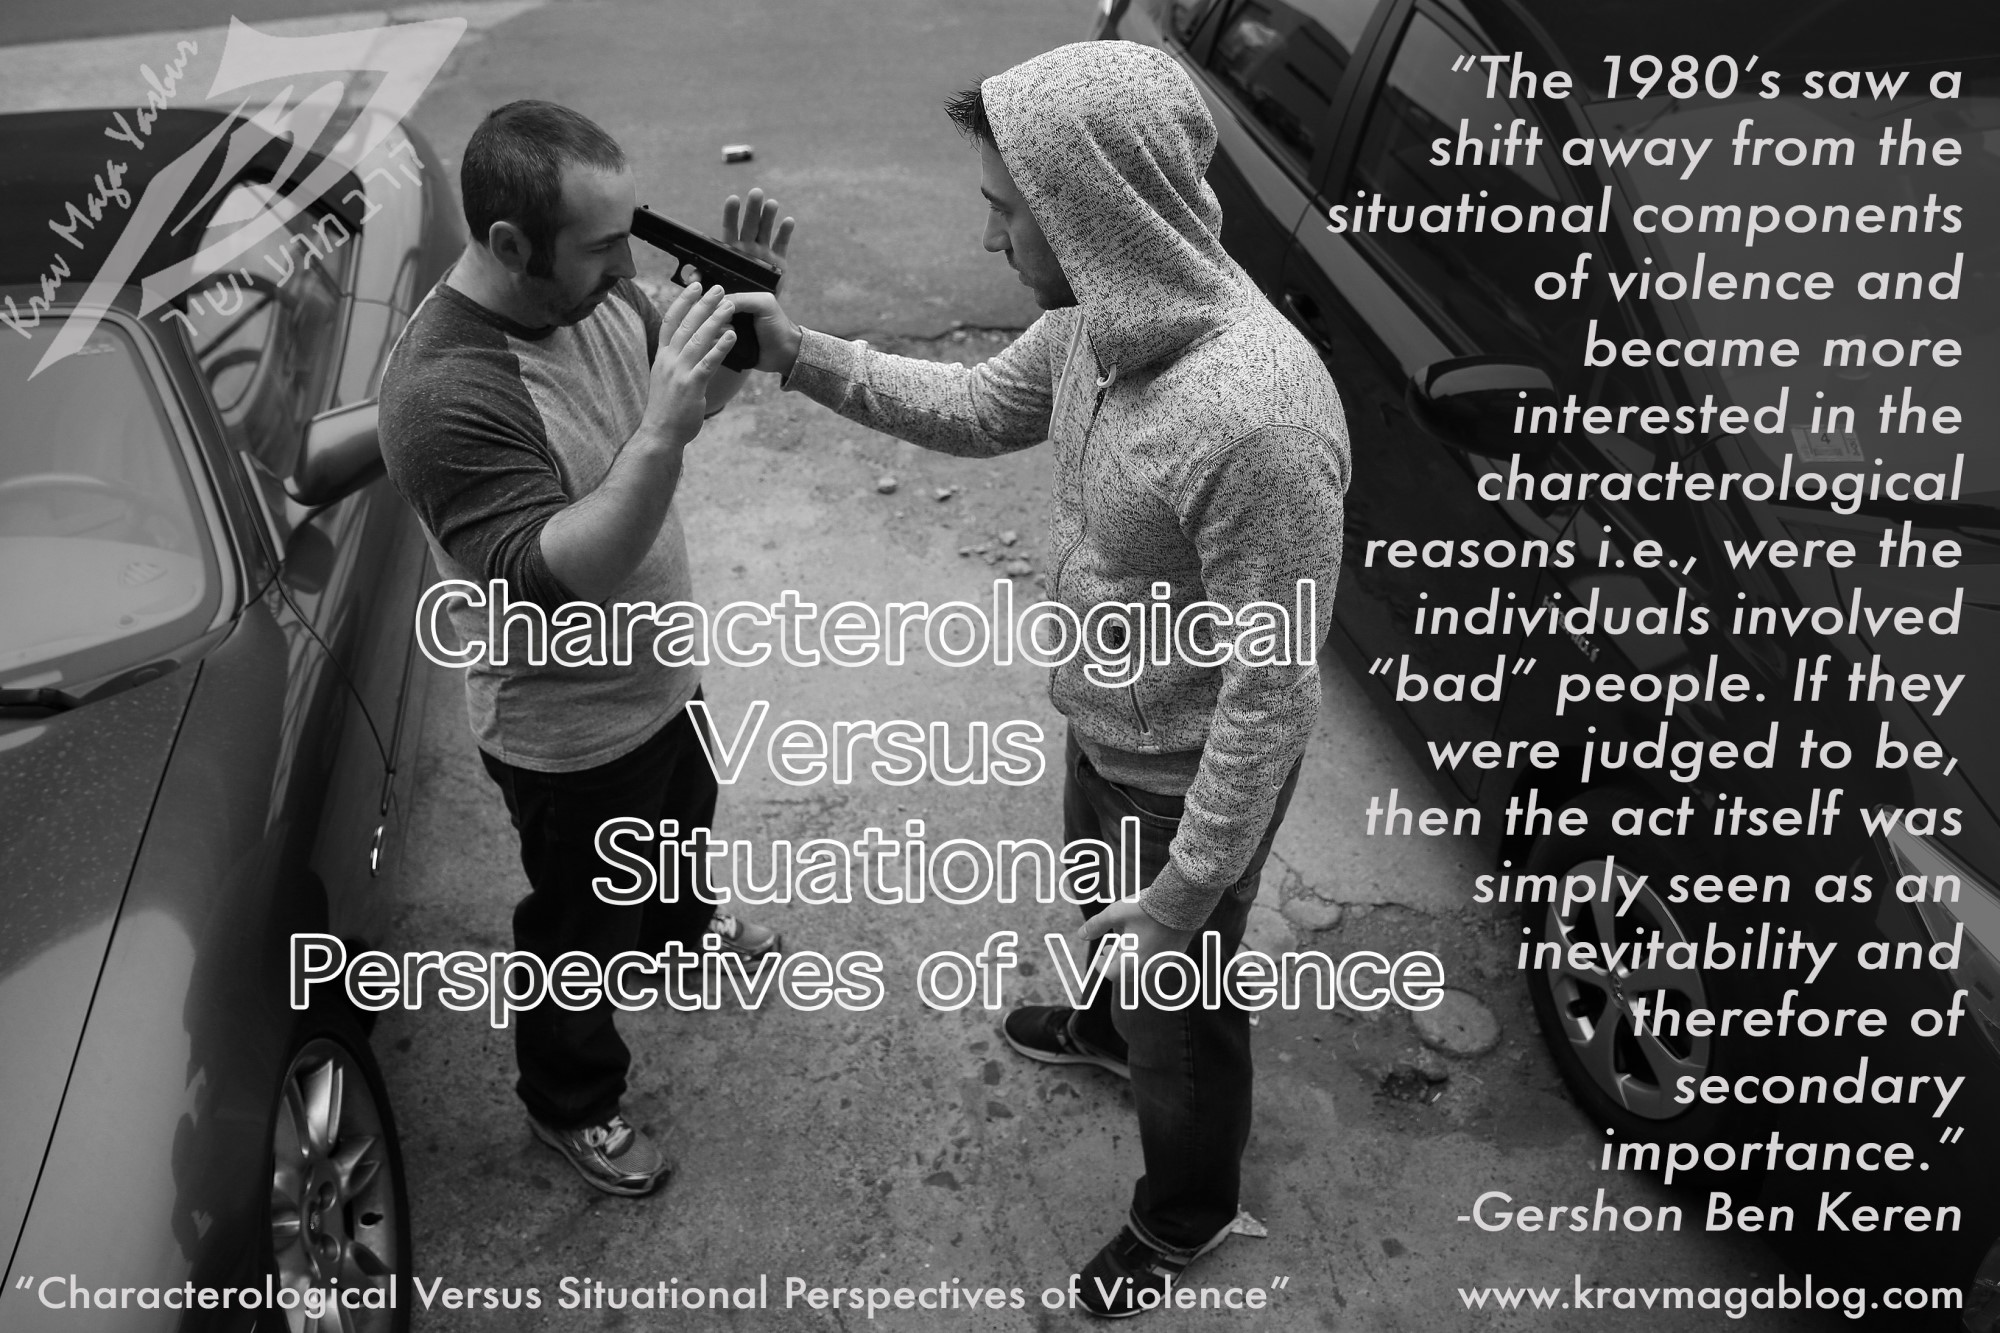 Characterological Versus Situational Perspectives of Violence